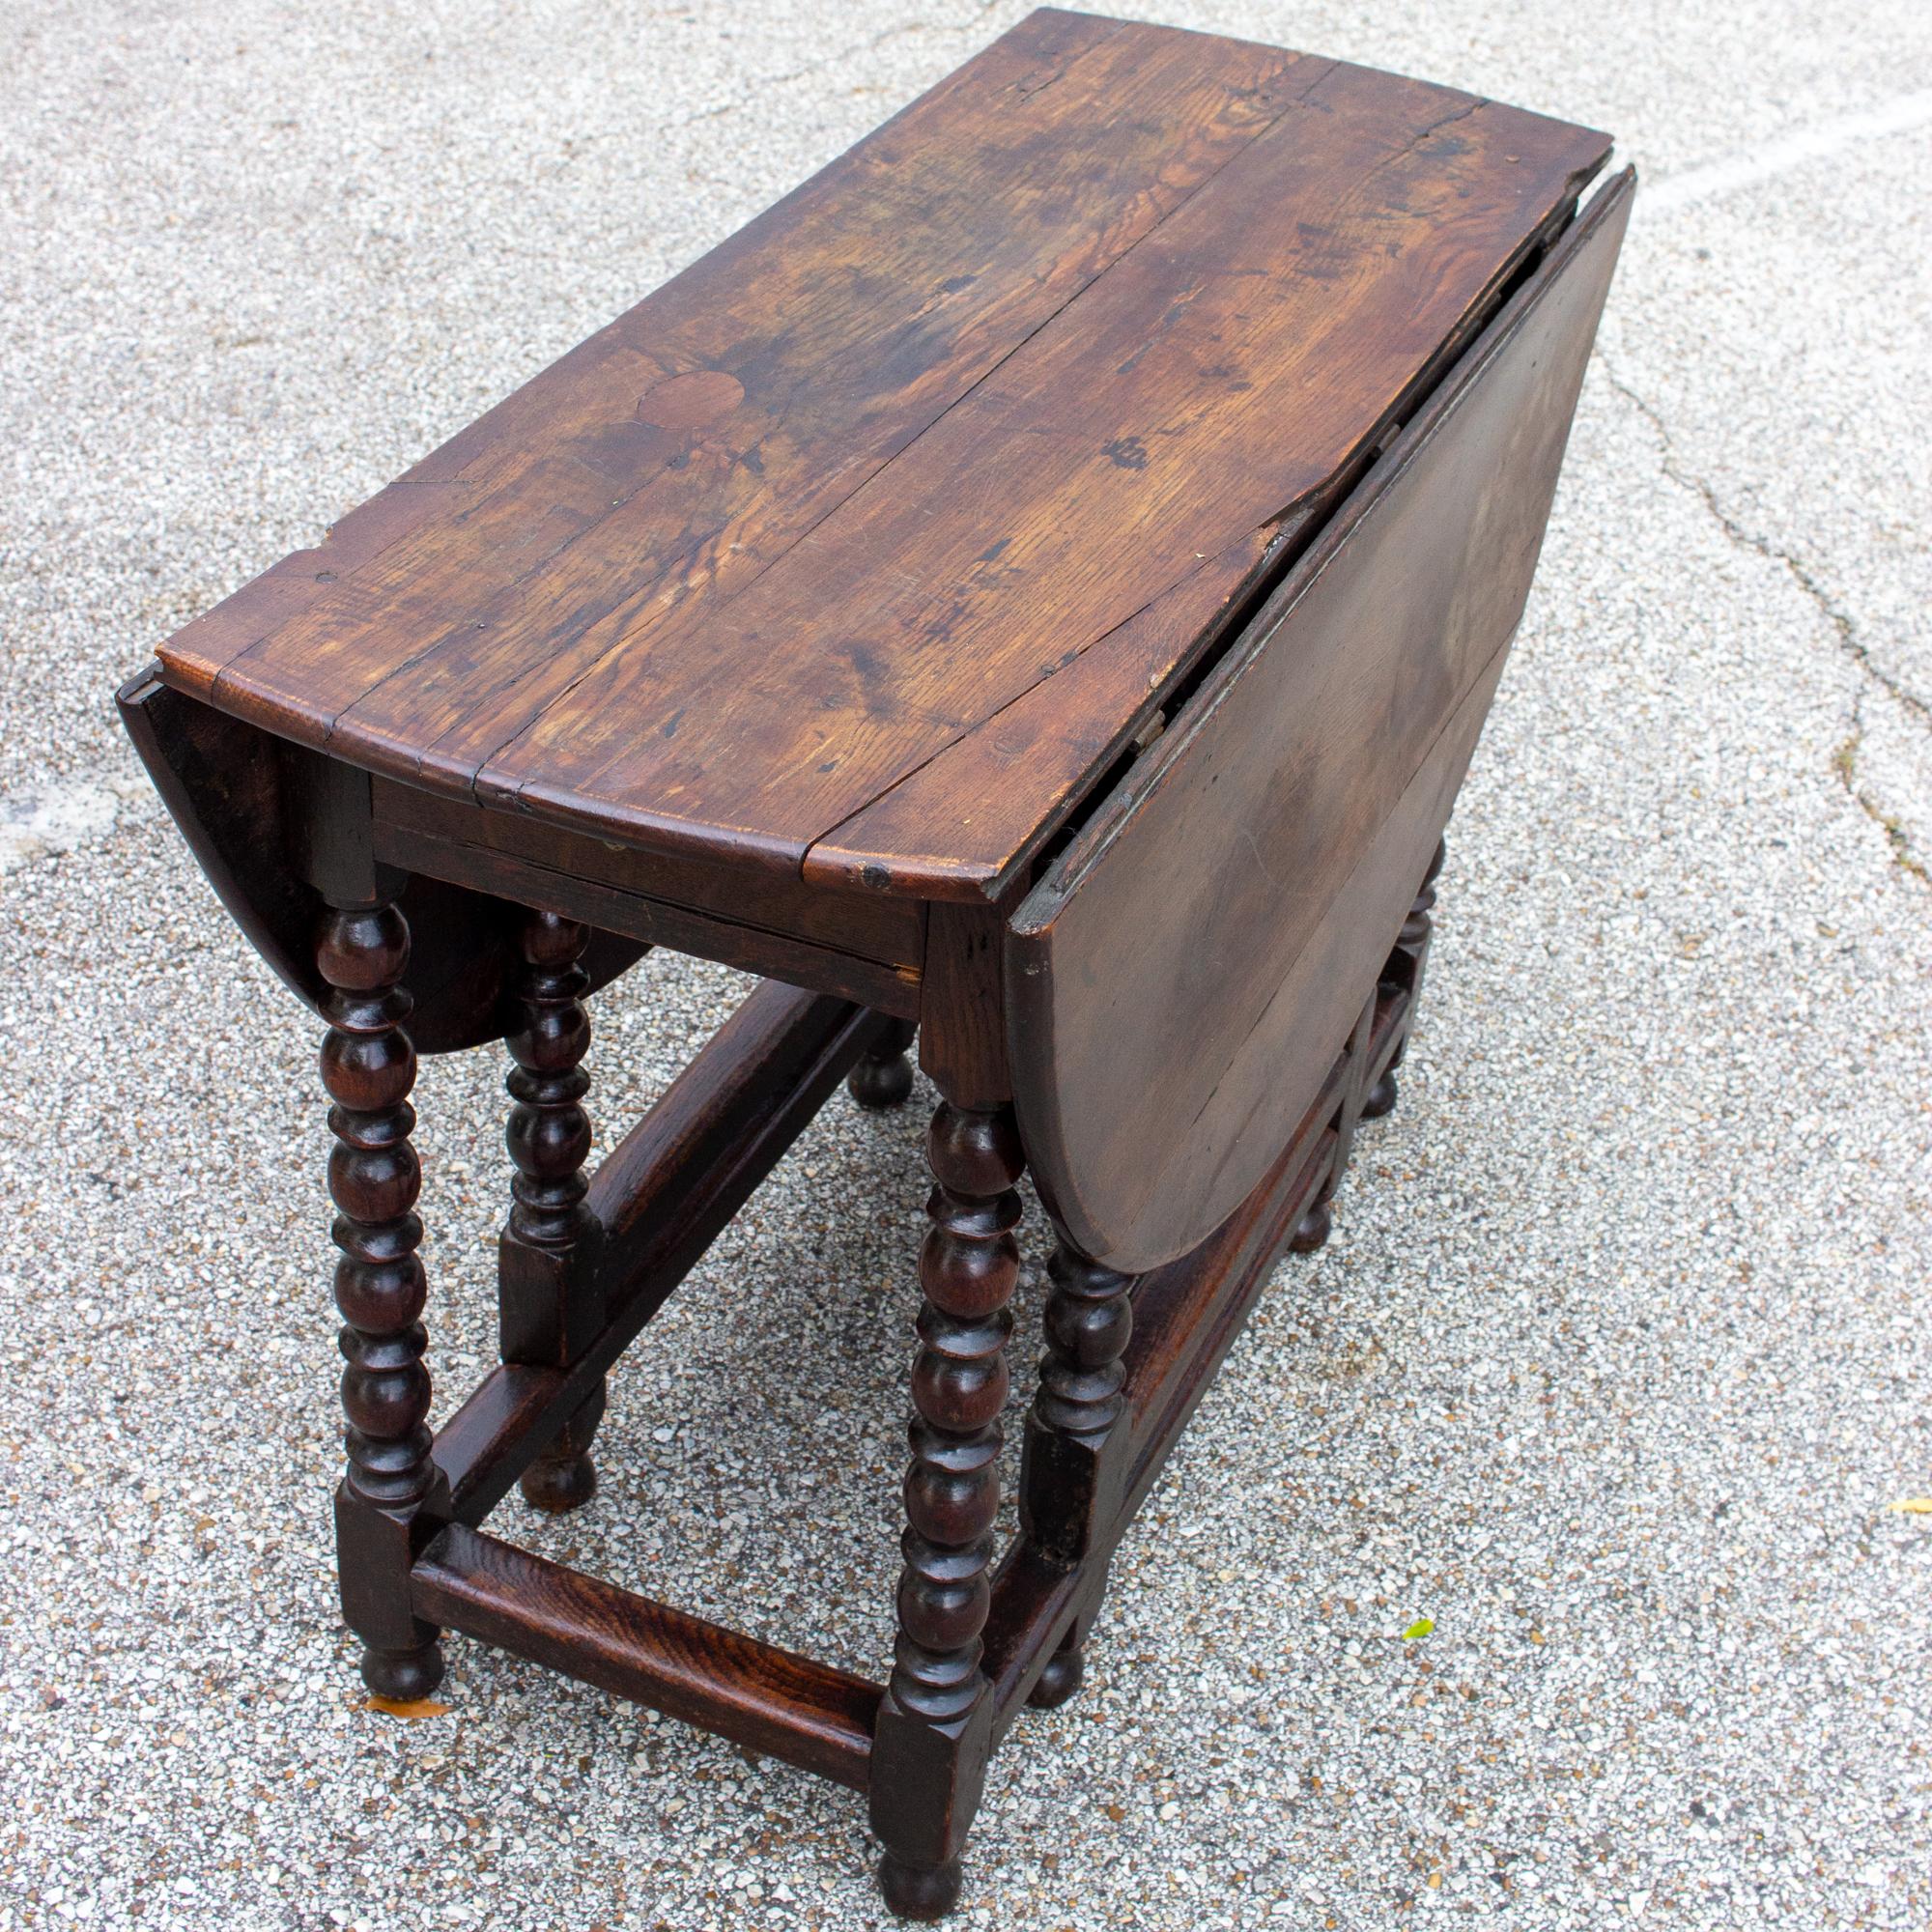 This antique French hand carved, oak gate-leg table features drop leaves on both sides, ball turned leg details and a center drawer for storage. The deep brown finish is likely original, and this piece can also be used as a console table when